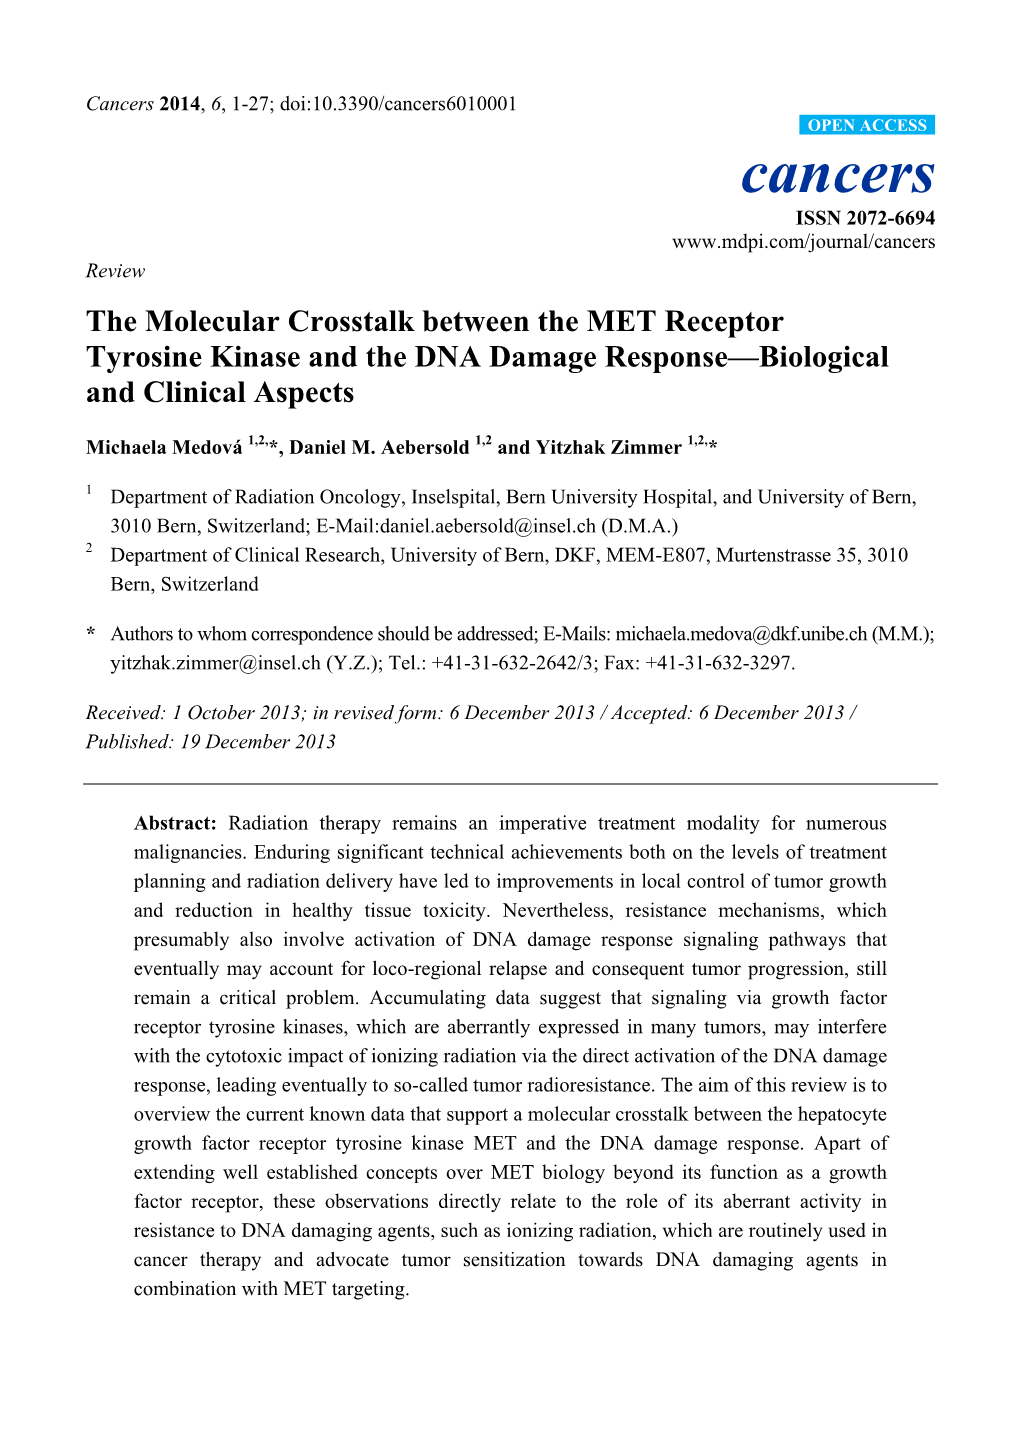 The Molecular Crosstalk Between the MET Receptor Tyrosine Kinase and the DNA Damage Response—Biological and Clinical Aspects